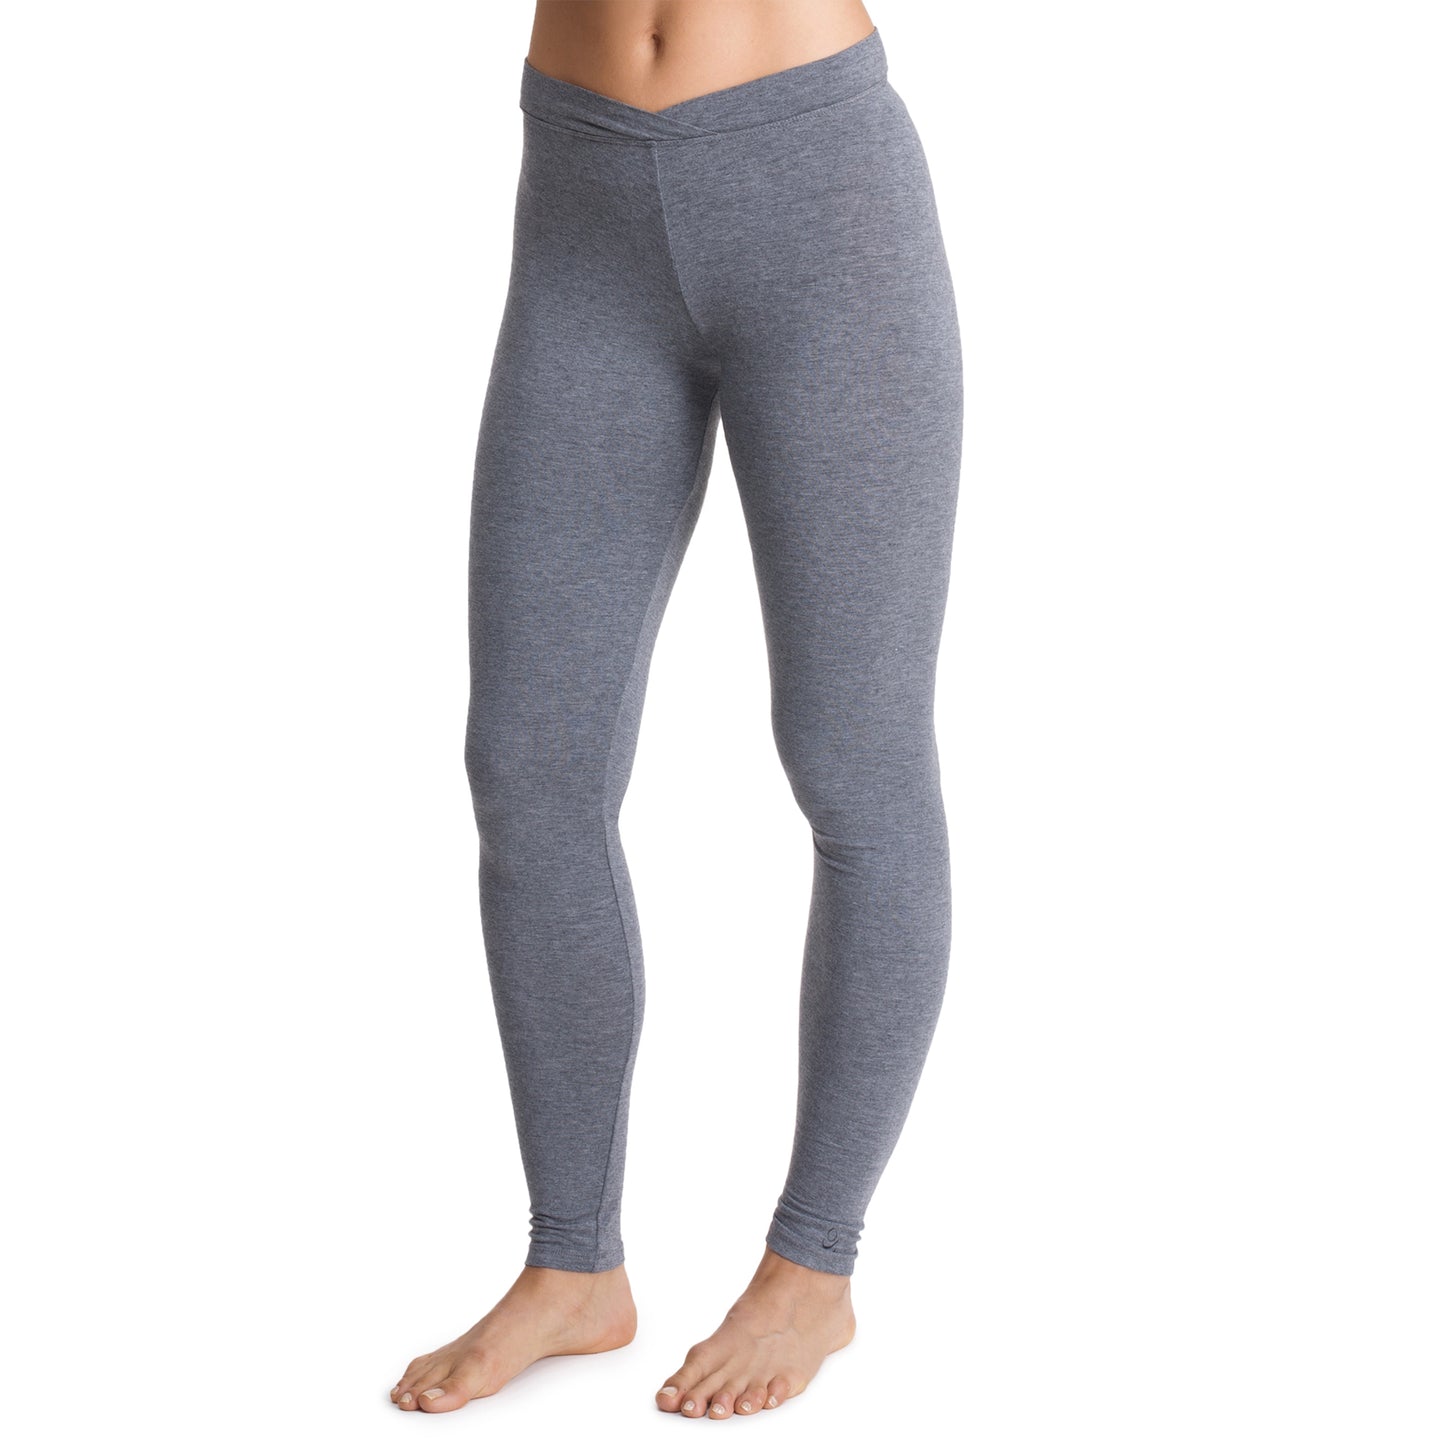 Charcoal Heather; Model is wearing size S. She is 5’9”, Bust 32”, Waist 25.5”, Hips 36”. @A lady wearing a charcoal heather stretch legging tall.